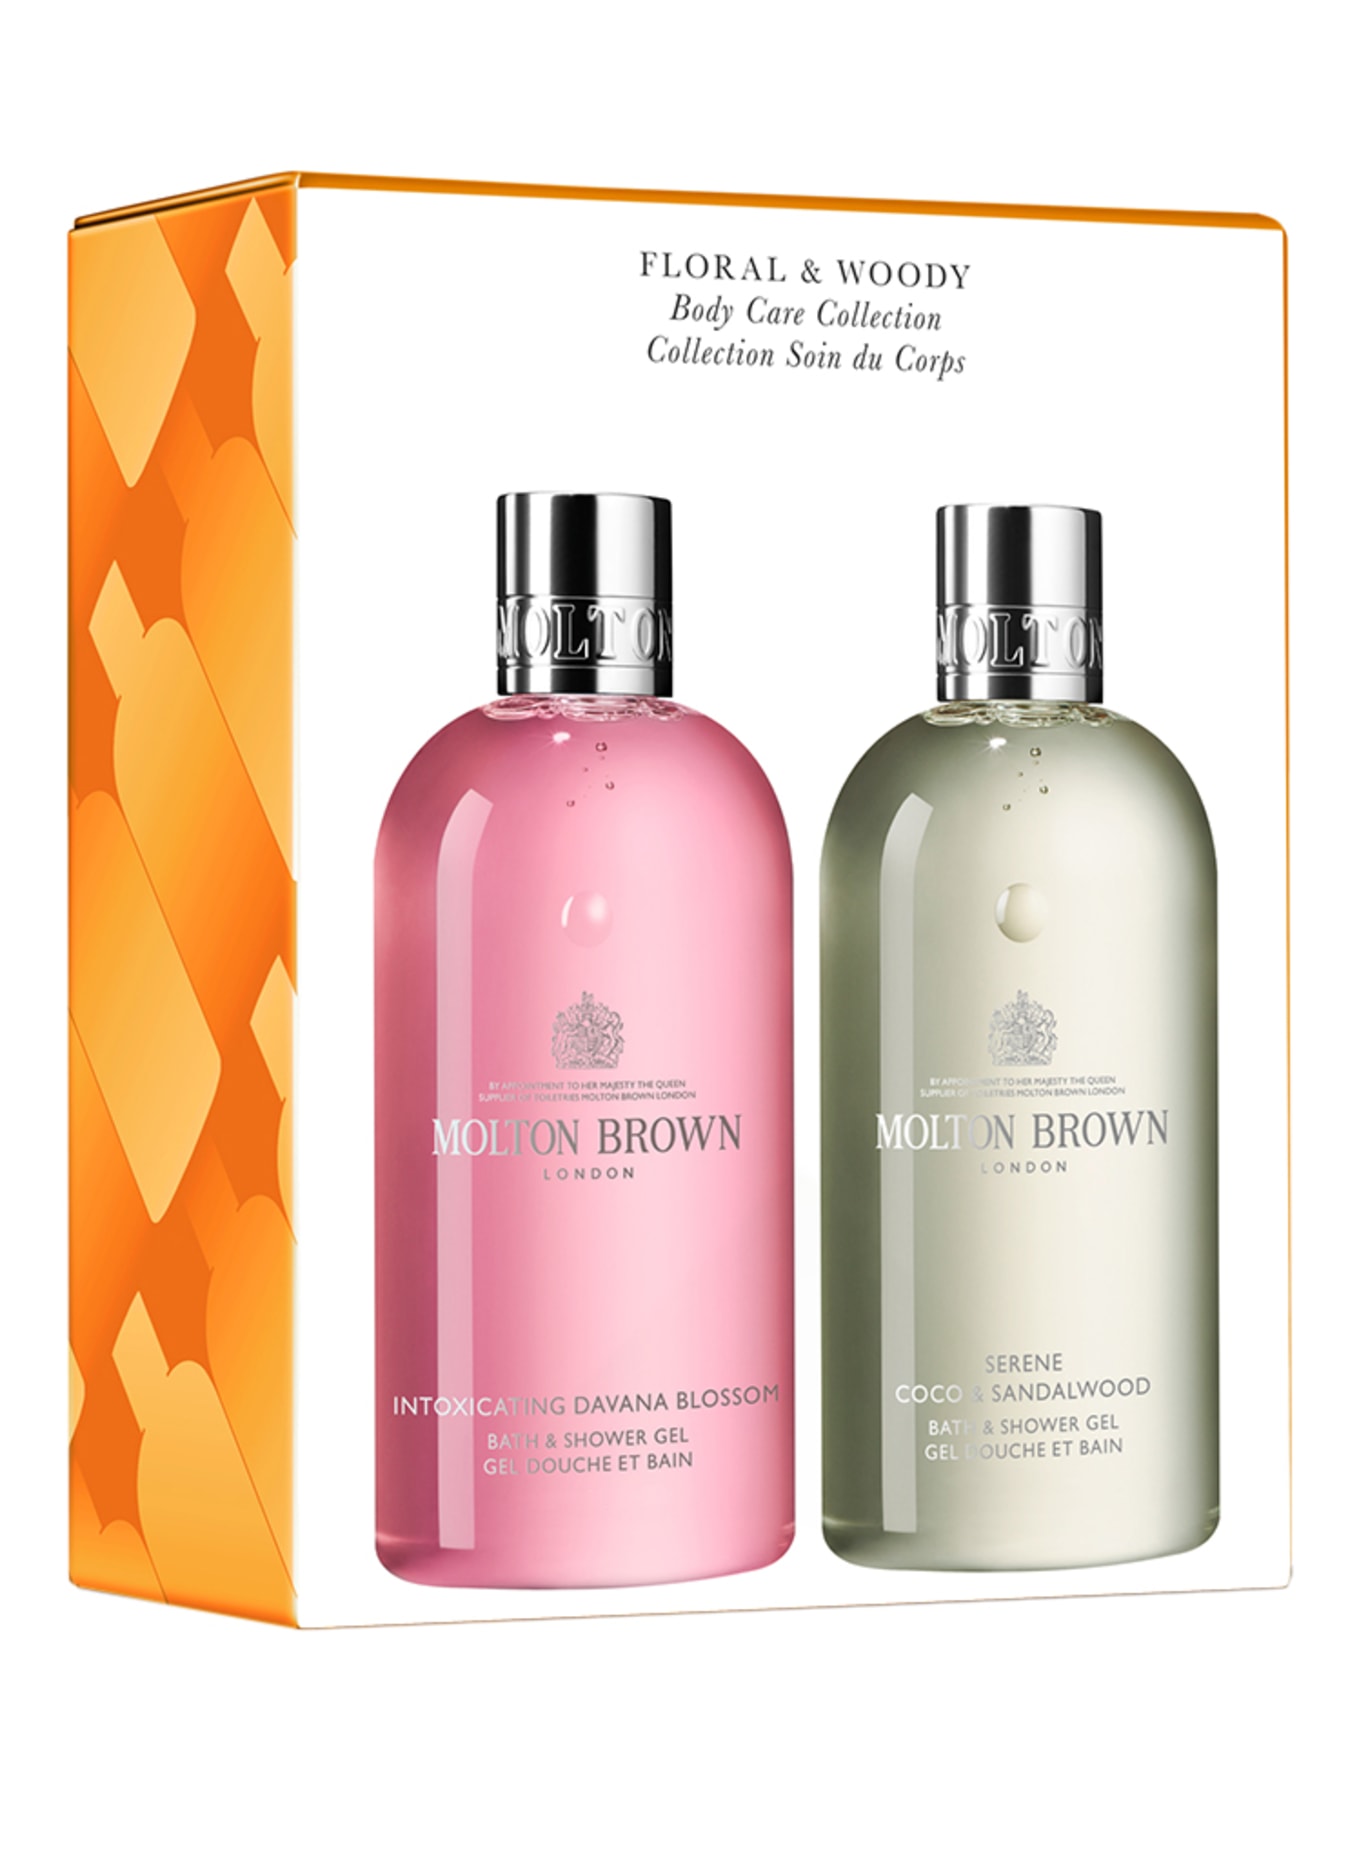 MOLTON BROWN FLORAL & WOODY BODY CARE COLLECTION (Bild 1)